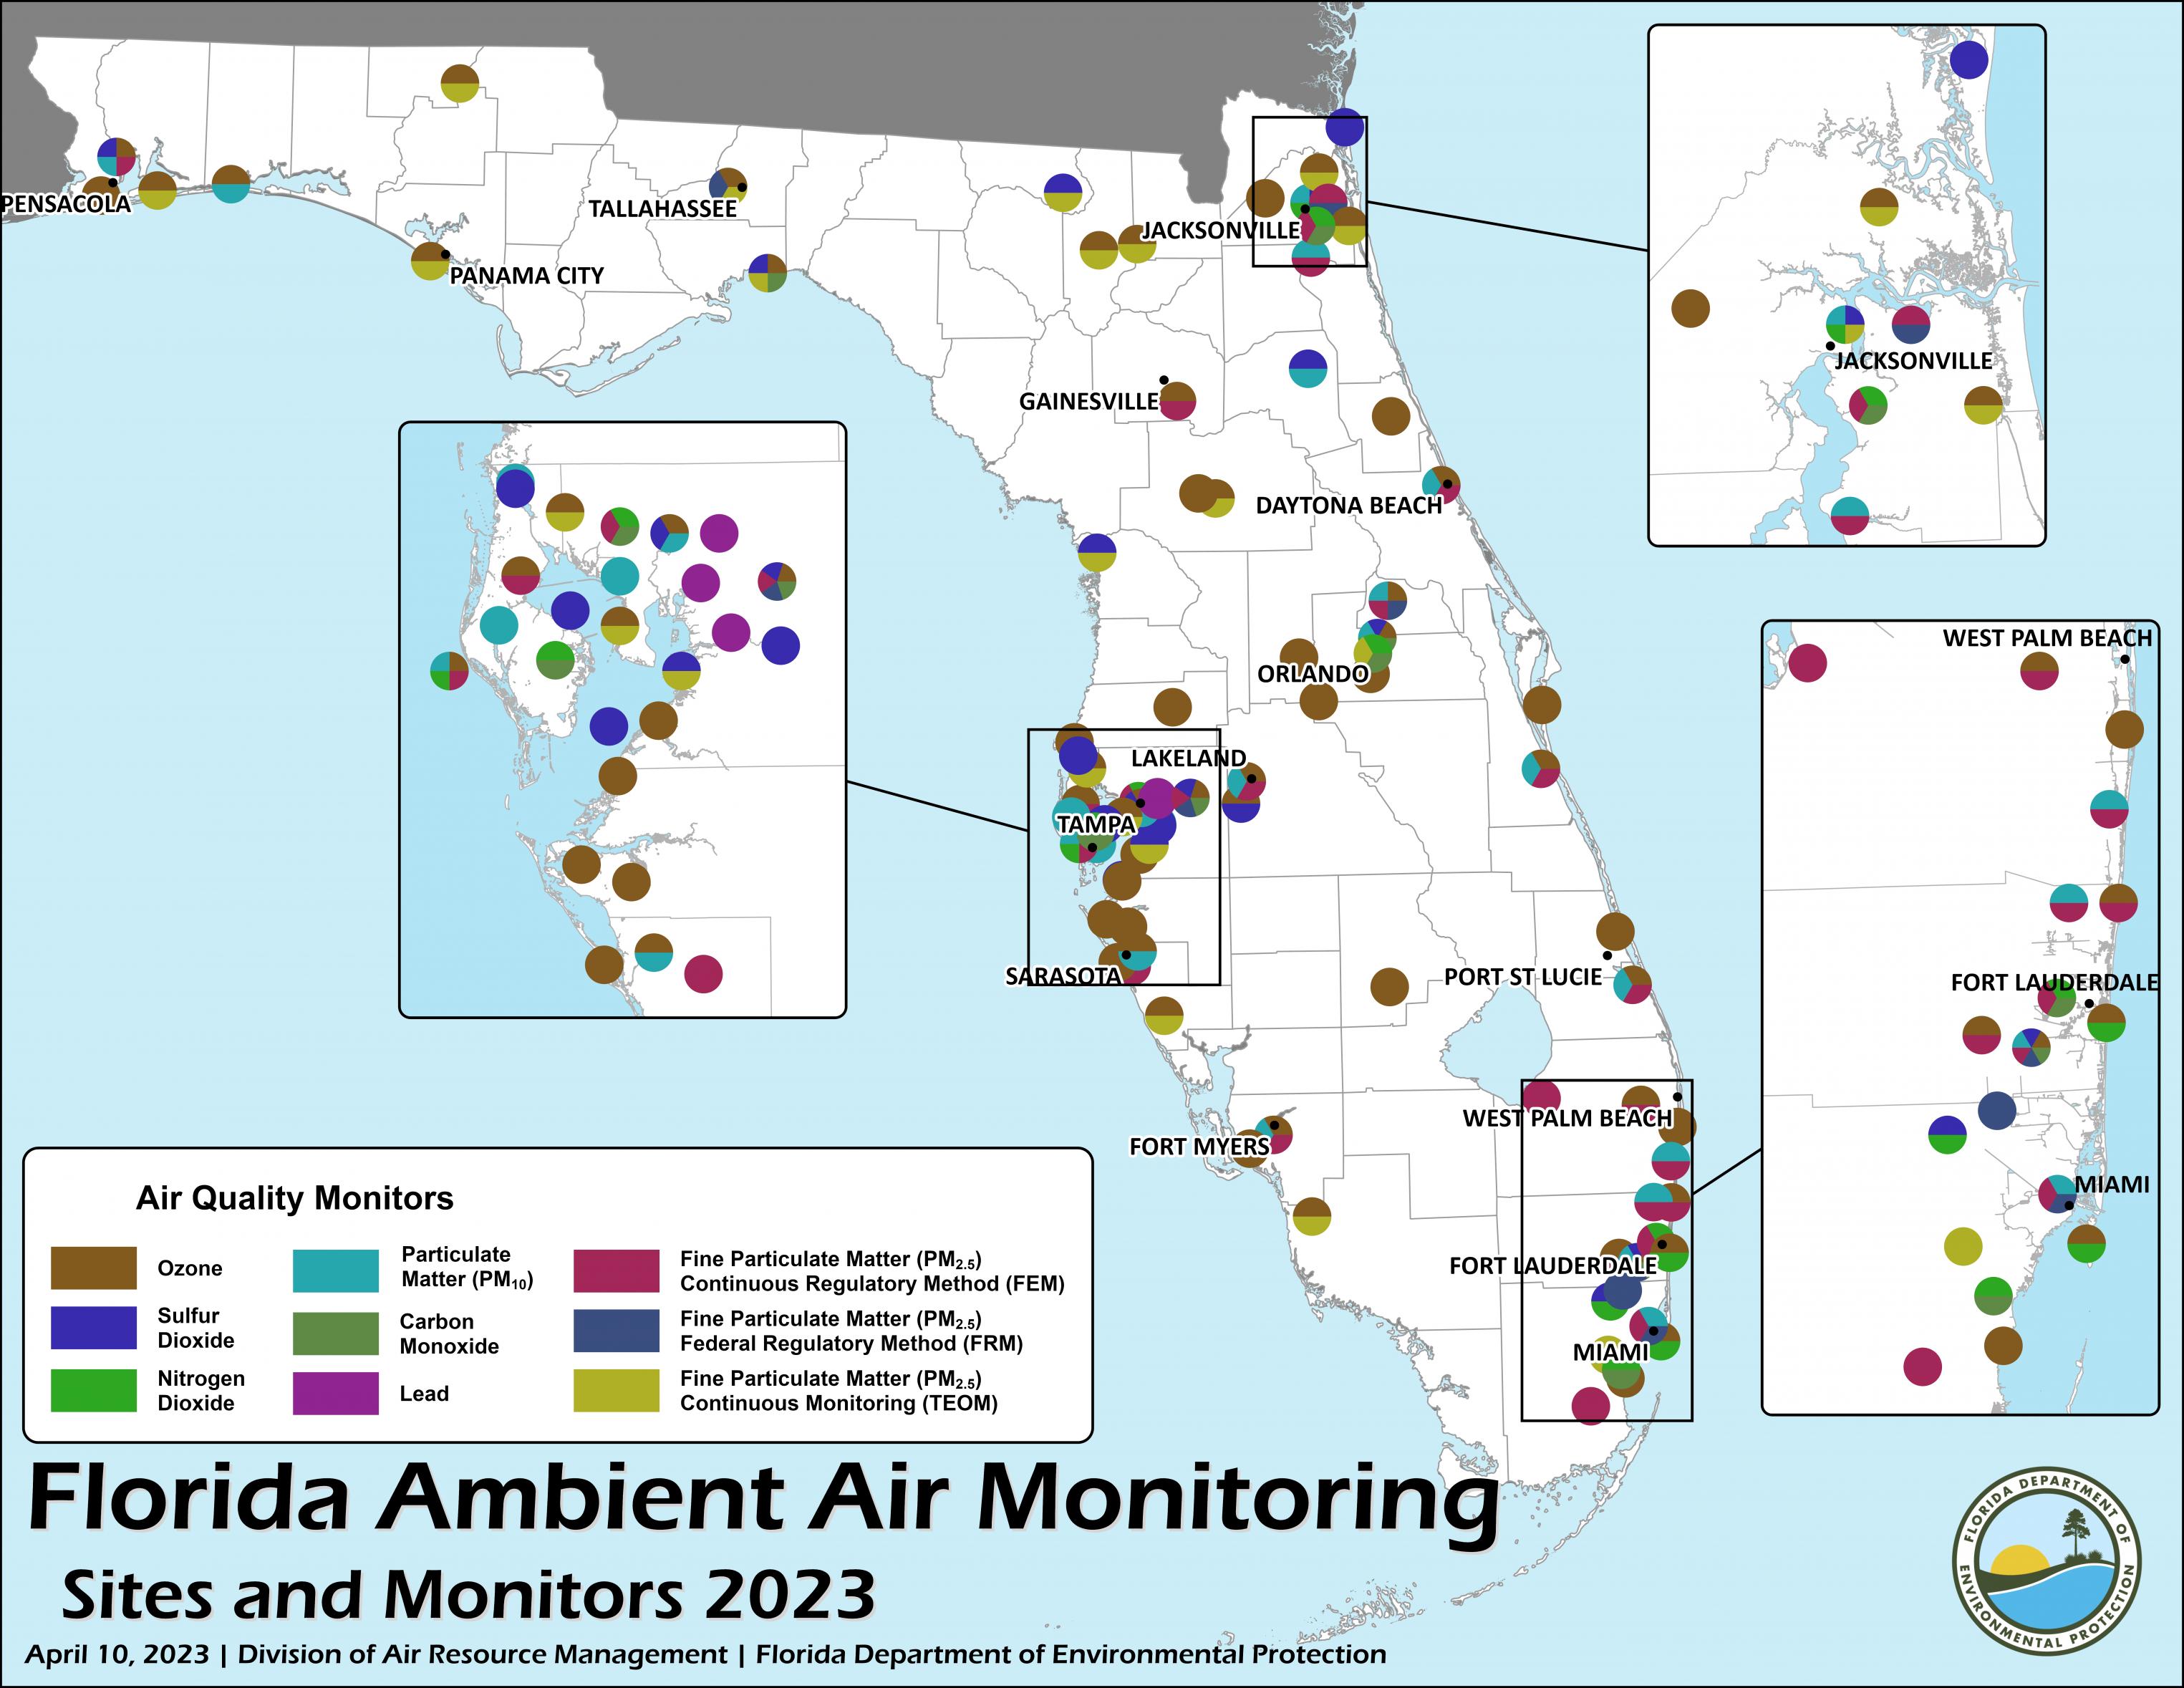 Map of Florida depicting the state’s Ambient monitoring network, which is located in 37 counties, in